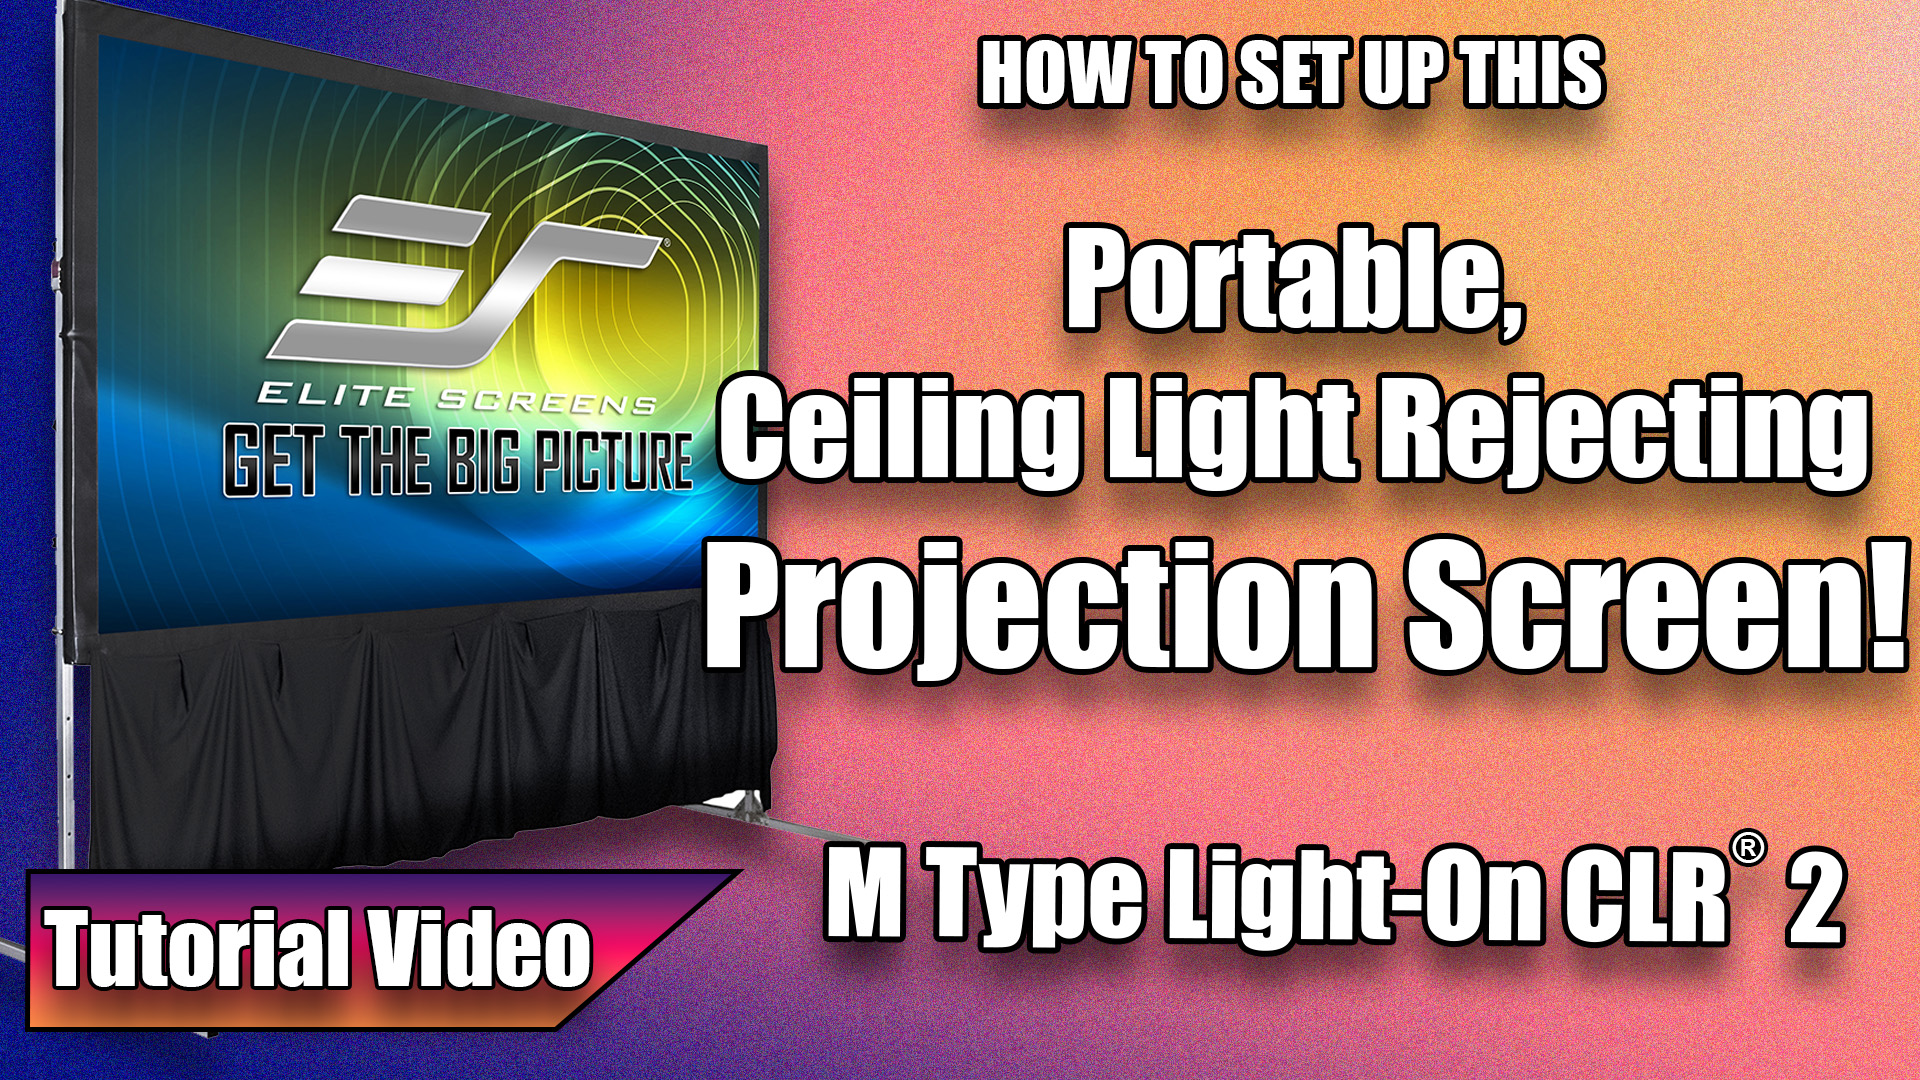 Set up Guide: Light-On CLR® 2 Portable Series